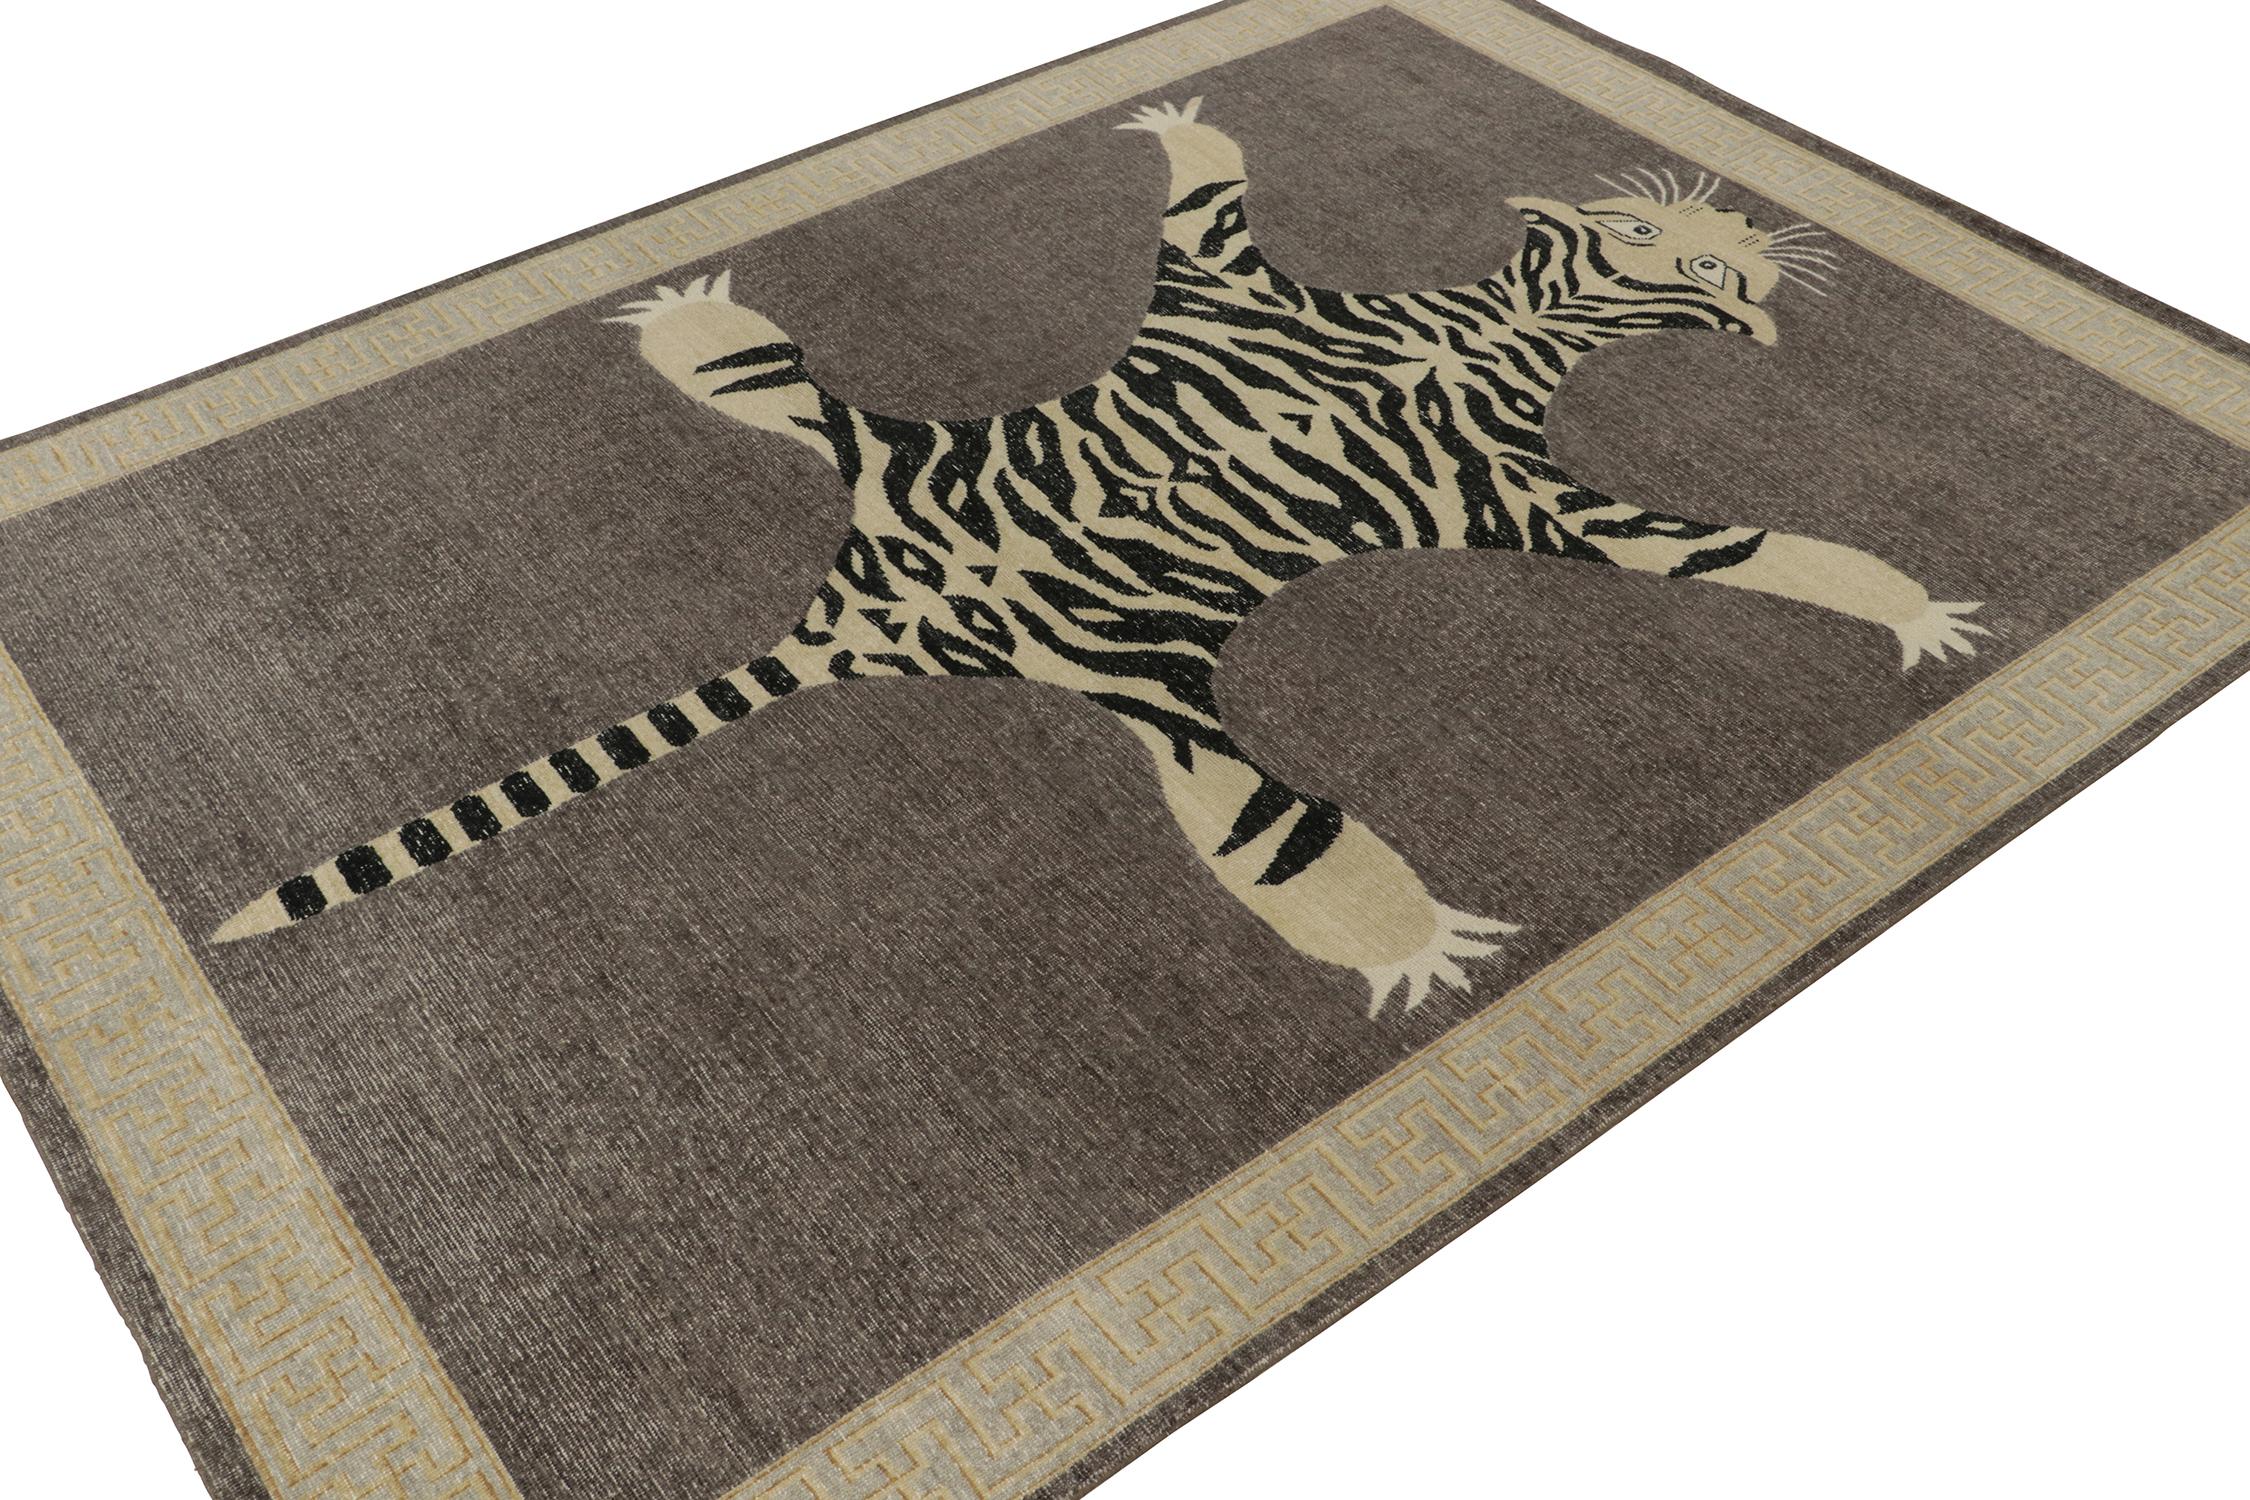 This hand-knotted wool 9x12 rug from Rug & Kilim’s Homage Collection recaptures the time-honored Tiger skin rug style.

Further On the Design: 

This particular piece is inspired by antique Indian Tiger-skin rugs of the most regal, graphic presence.